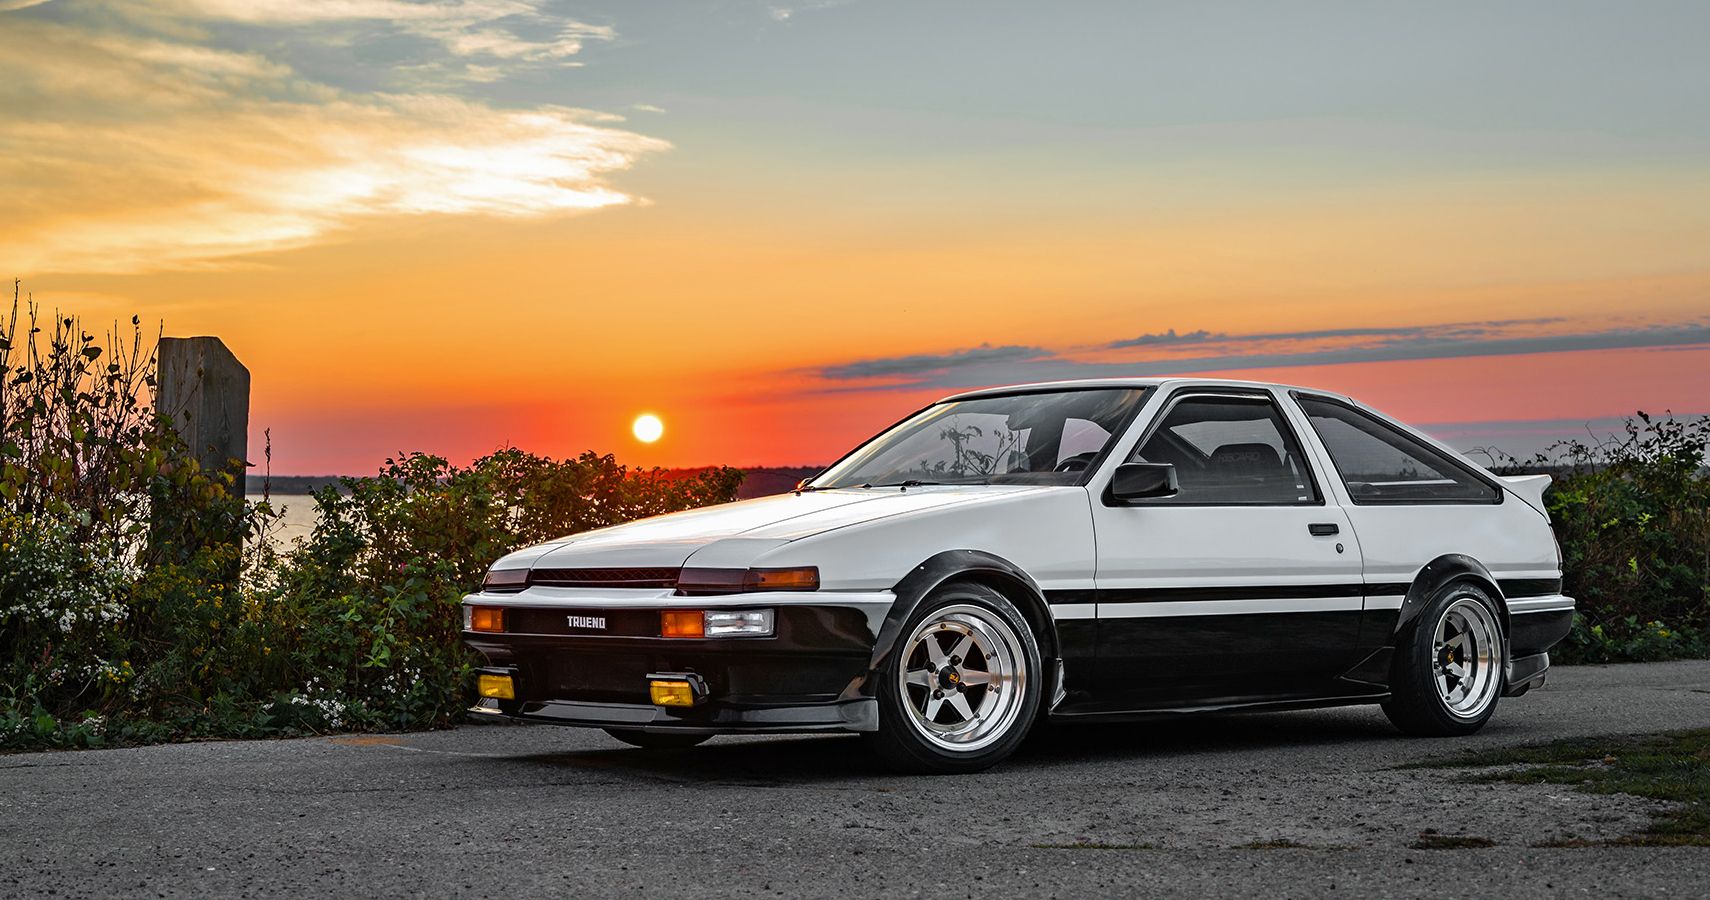 Toyota Corolla AE86 during a sunset